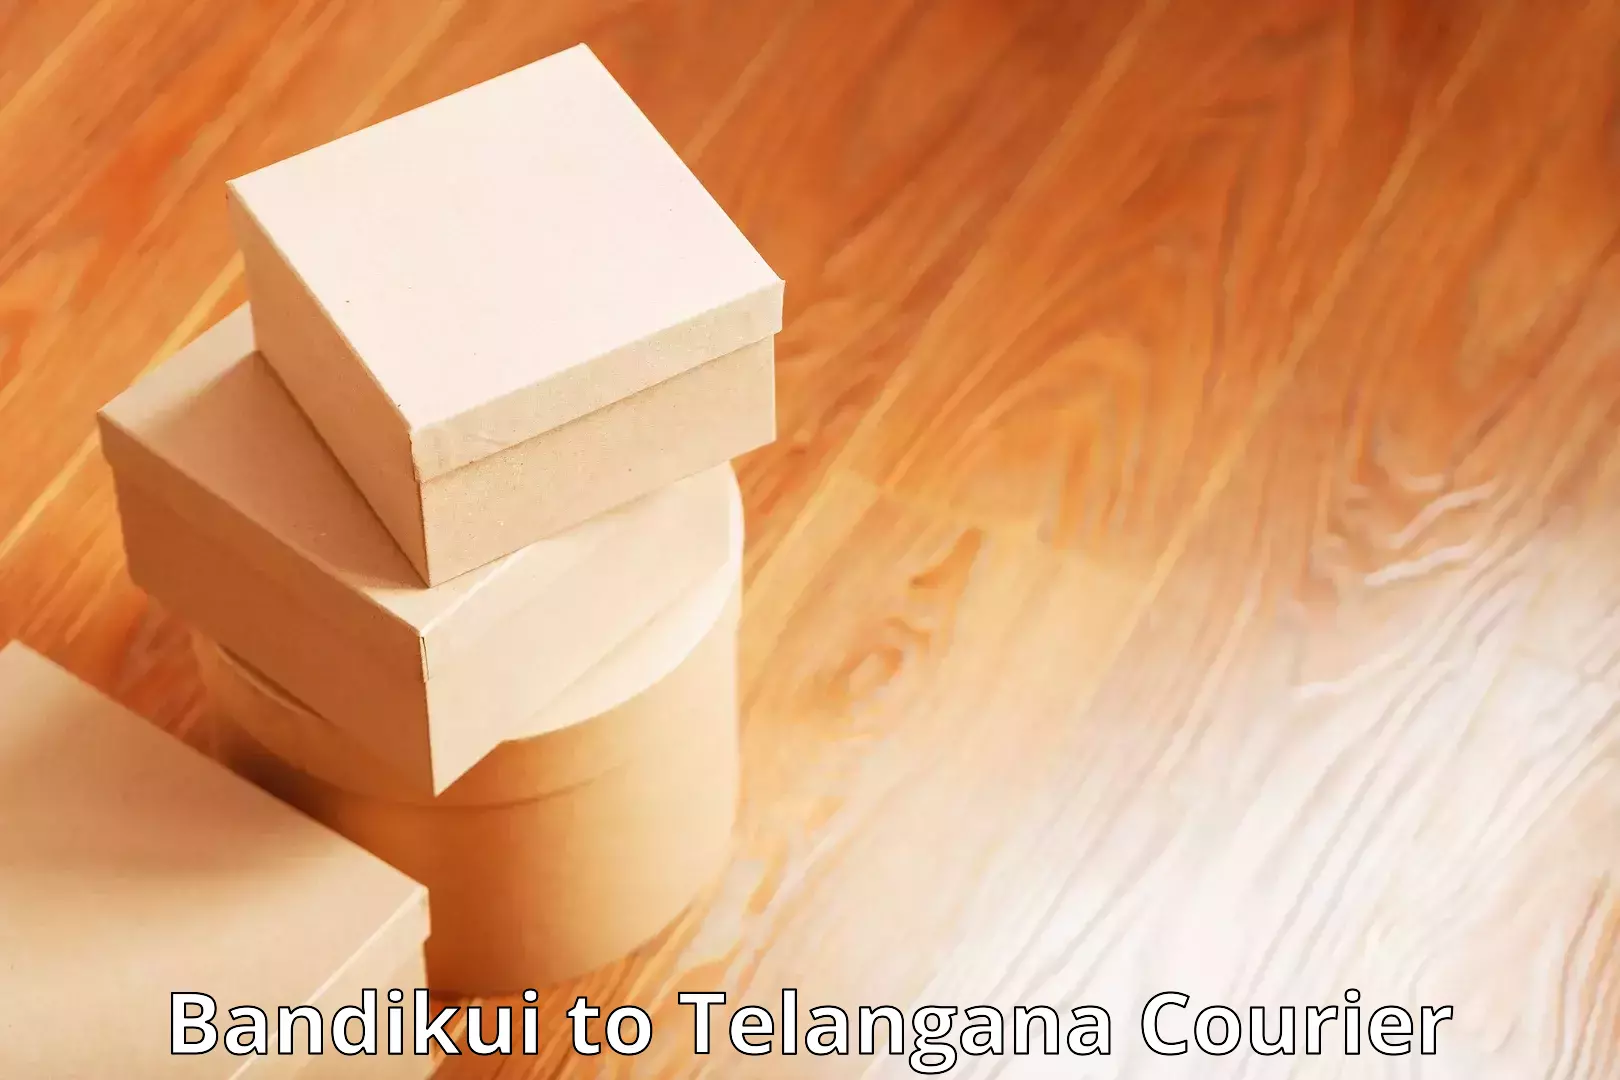 Courier services in Bandikui to Telangana